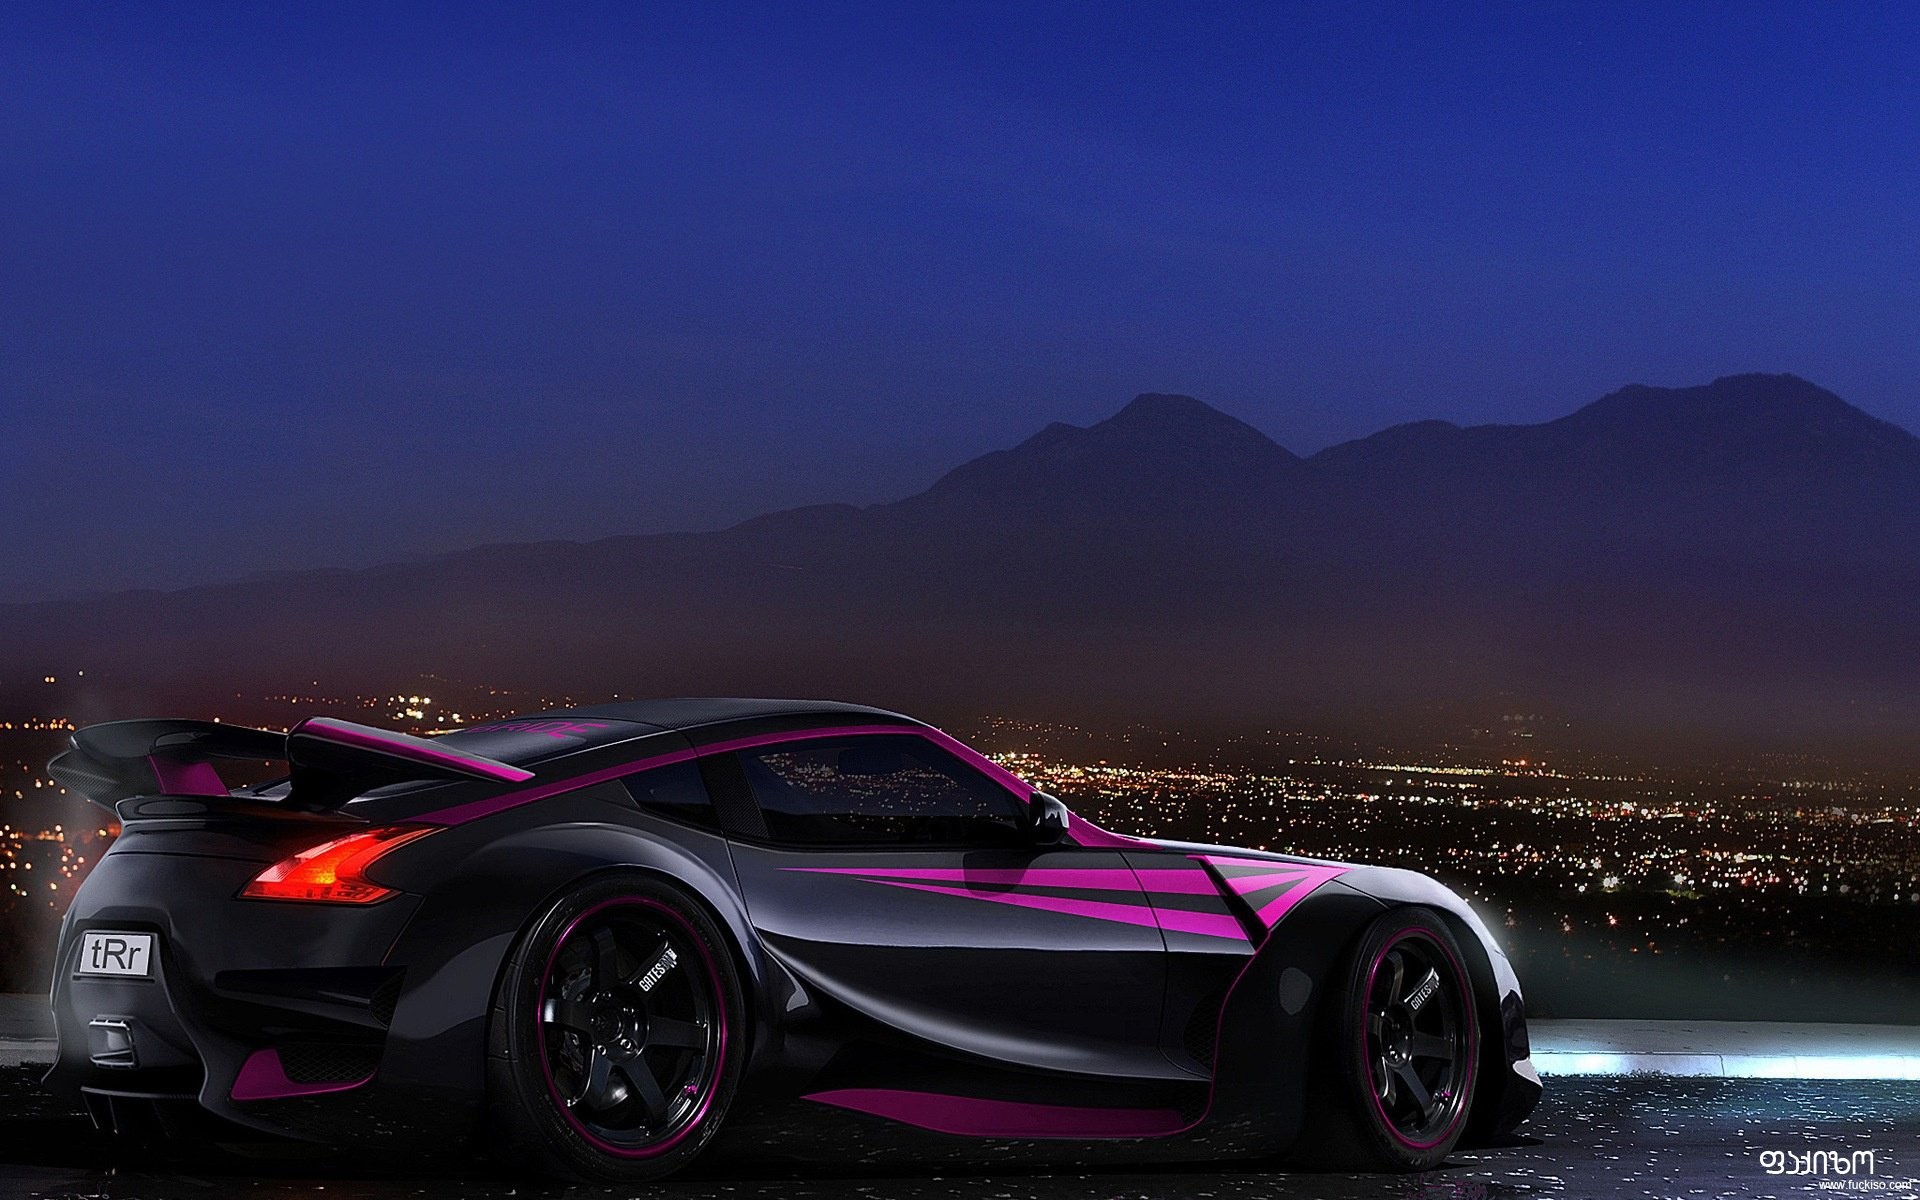 black, Cityscapes, Cars, Purple, Vehicles, Nissan, Z, Skyscapes Wallpaper